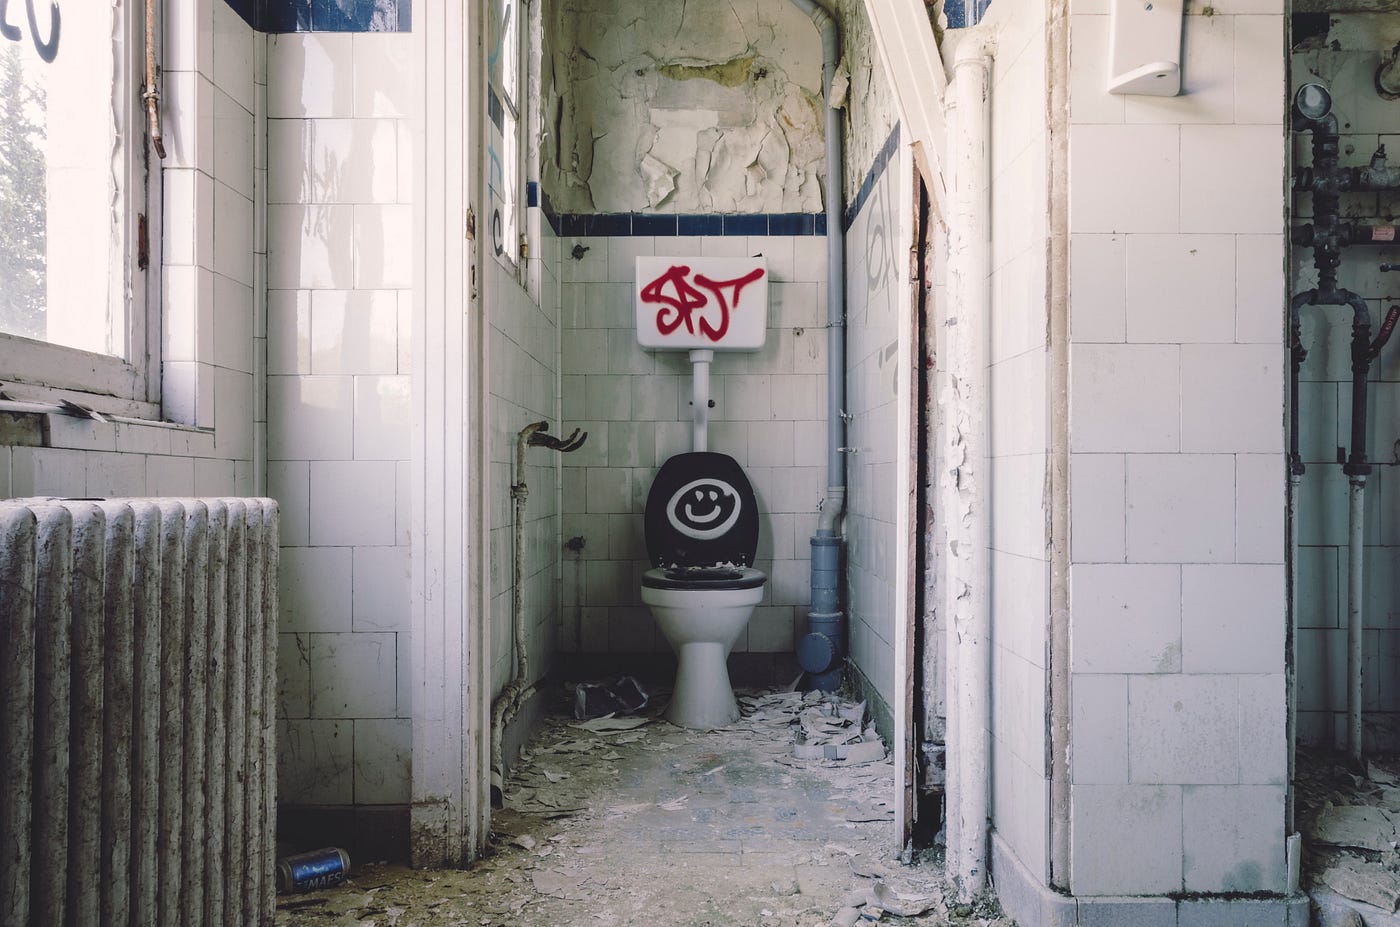 The Terror in the Toilet Whats Up With Bathroom Ghosts, and Why Are They Watching OUR Unfinished Business? by Cat Baklarz Writers Blokke Medium picture